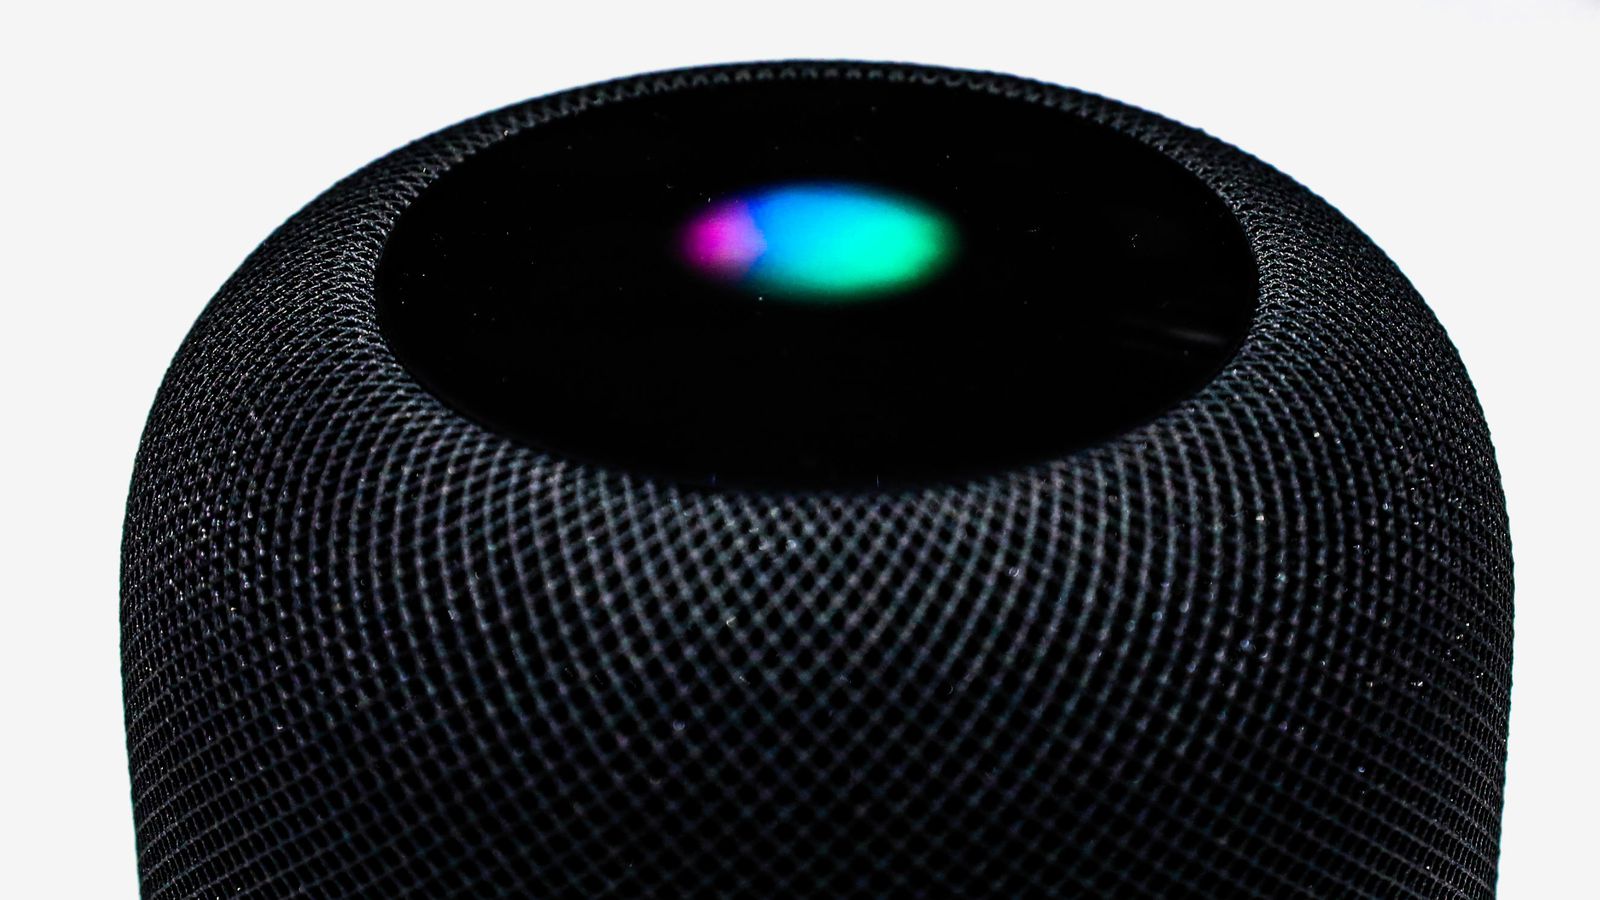 Apple expected to launch a “SiriOS” in 2020, says report